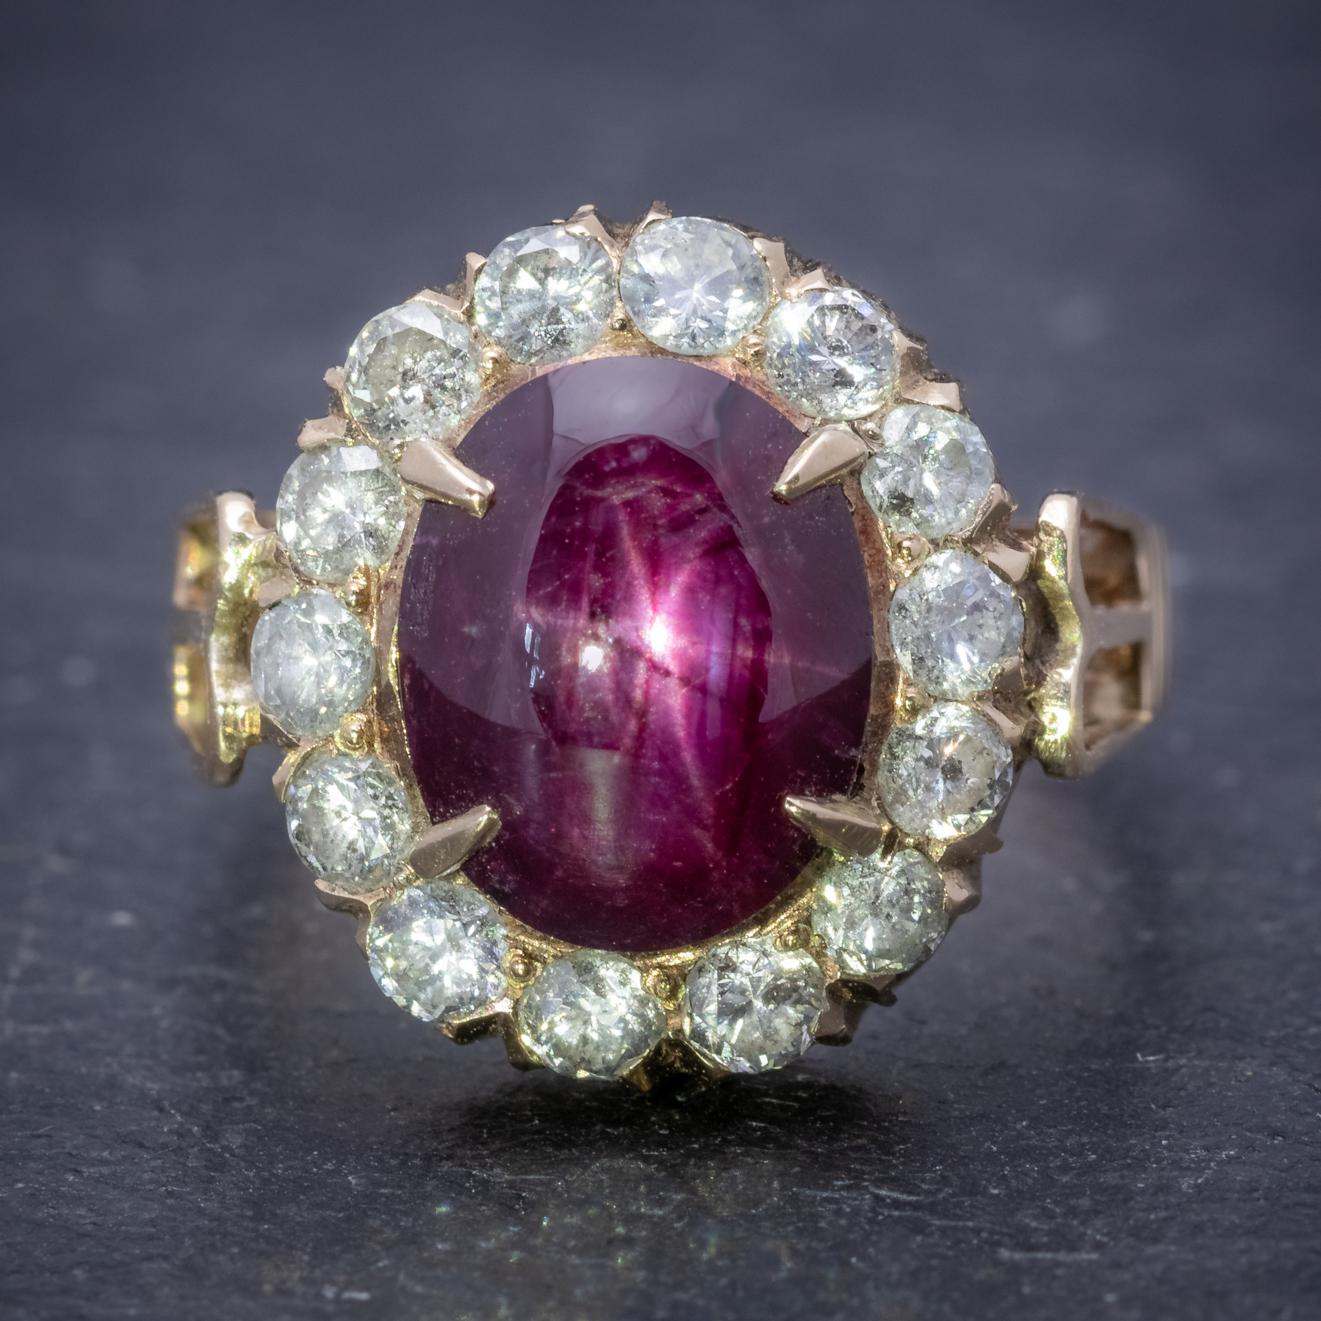 This magnificent antique Victorian cluster ring is adorned with a natural 3ct Star Ruby which is a lovely deep red colour and features a mystifying glow that shimmers across the surface in the shape of a star. 

The Ruby is surrounded by a halo of